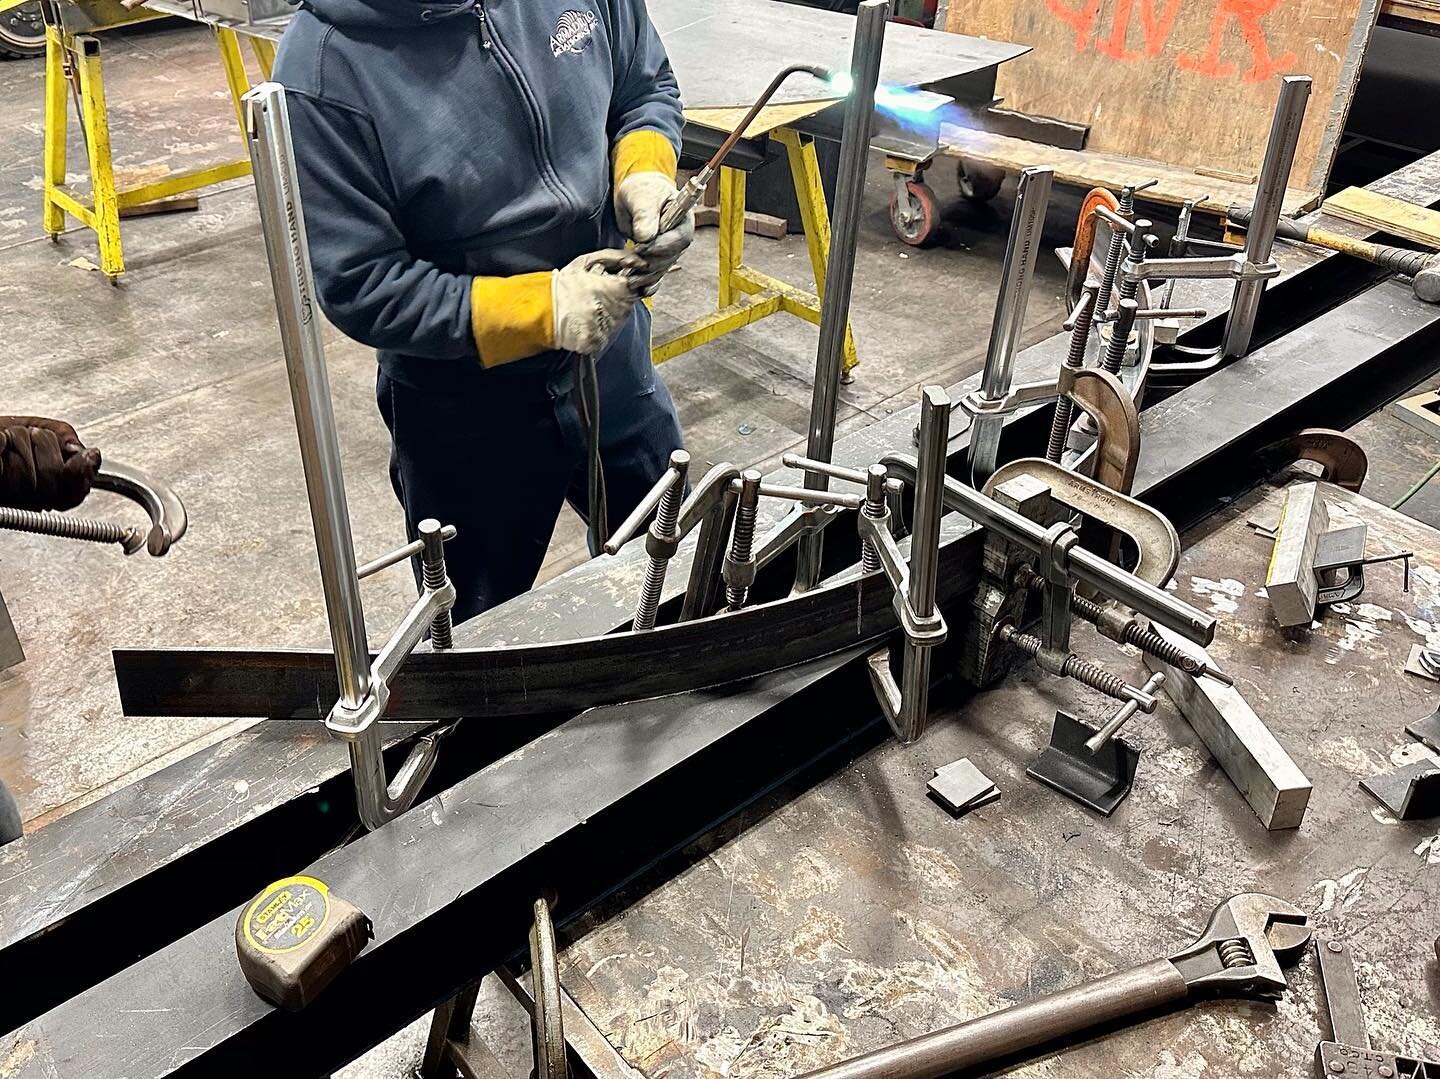 More structural steel shaping and setting of the Juliet balcony.

#structuralsteel #julietbalcony #customsteel #steelstructure #steelstructures #allinthedetails #allinthedetail #custommetal #customfabrication #custommetalfabrication #metalfabrication